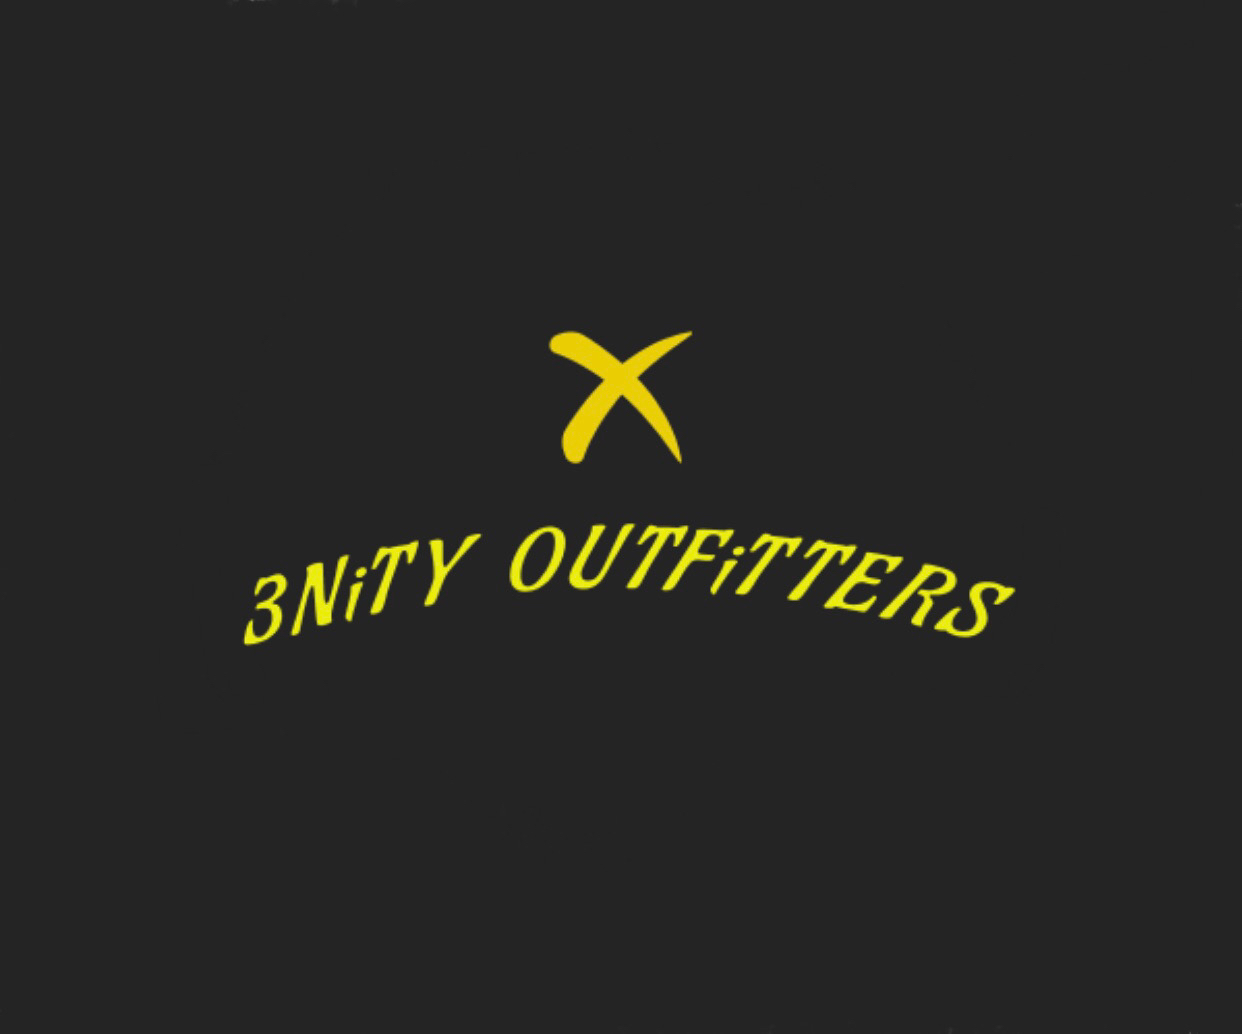 3NiTY OUTFiTTERS-logo.jpg